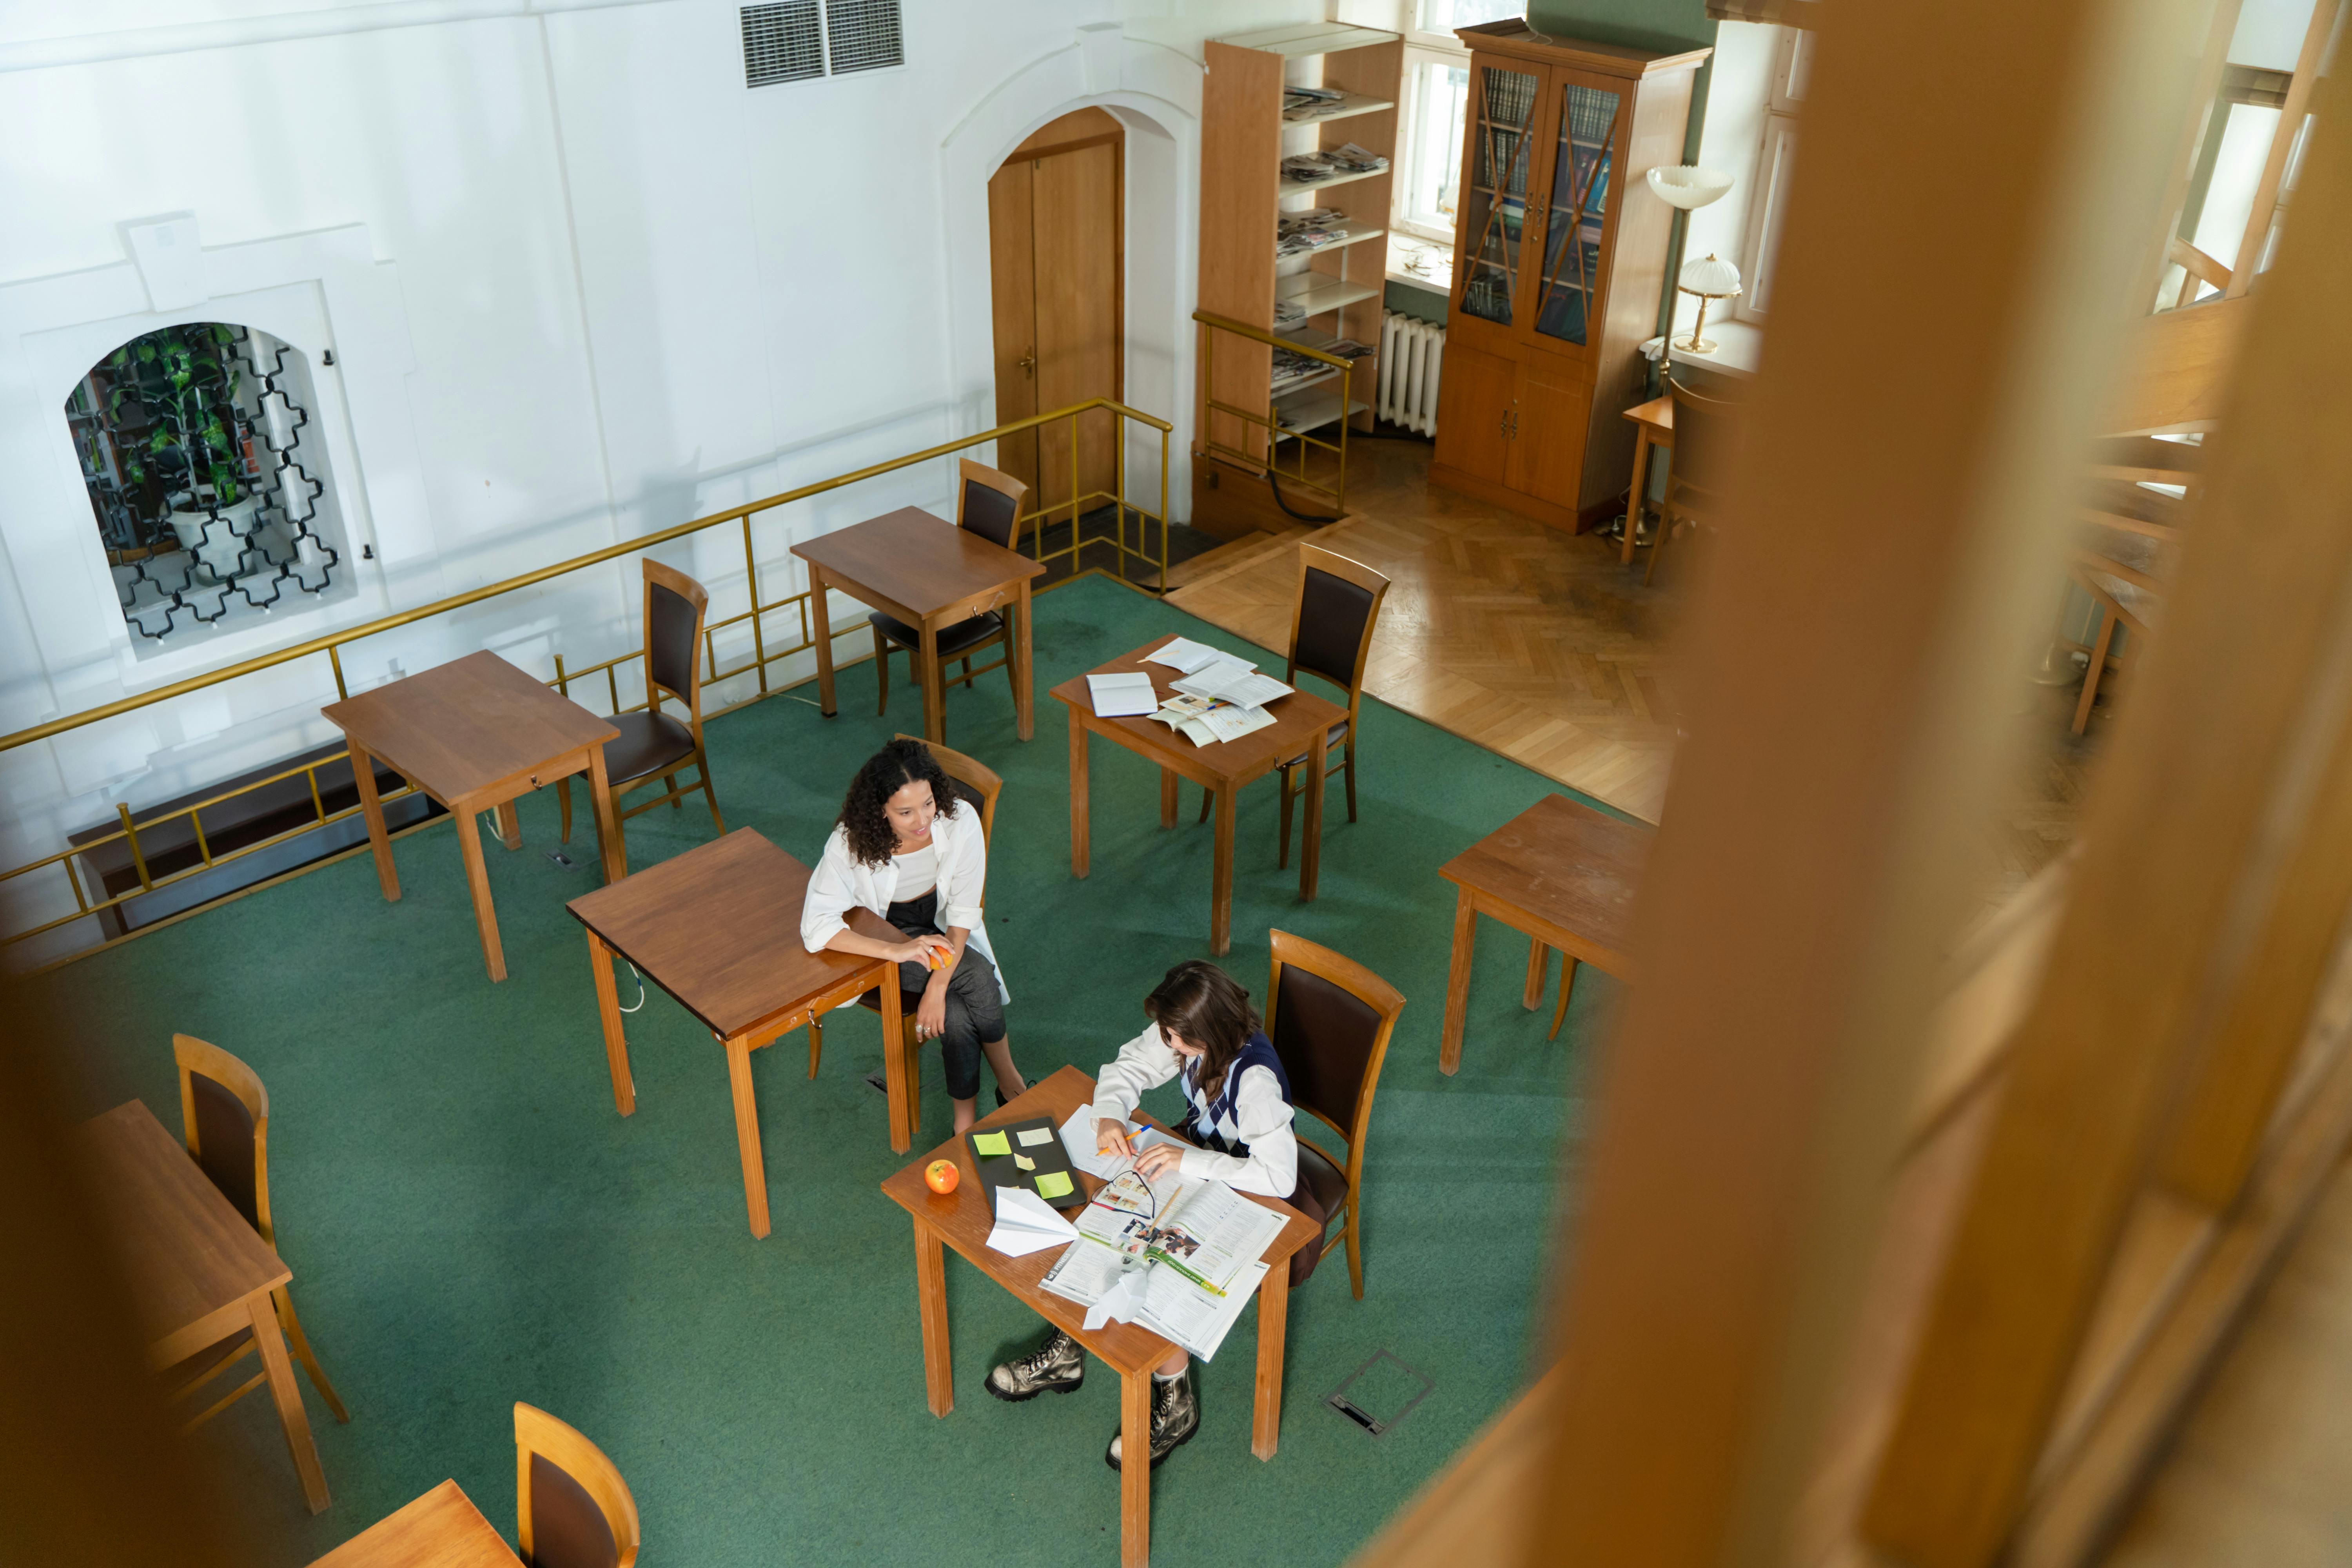 Two young female students in a library | Source: Yaroslav Shuraev on Pexels